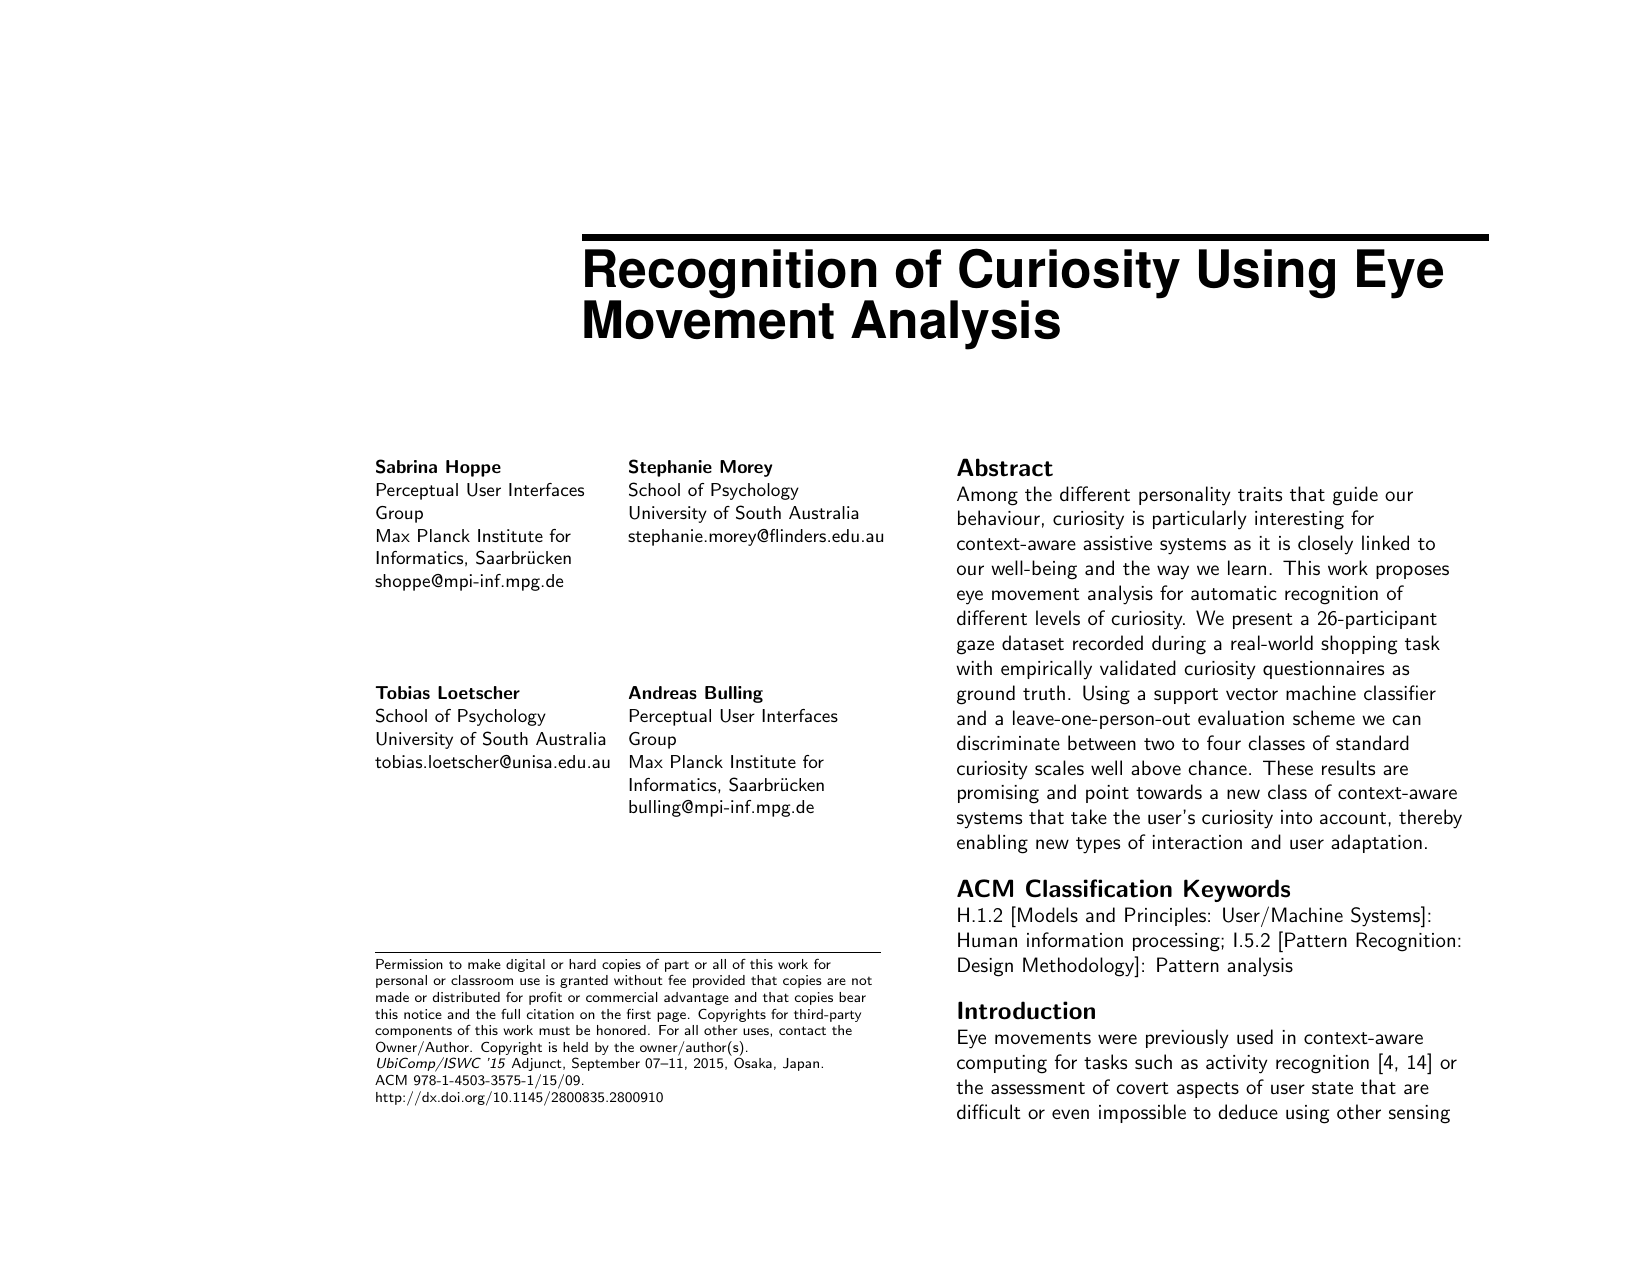 Recognition of Curiosity Using Eye Movement Analysis